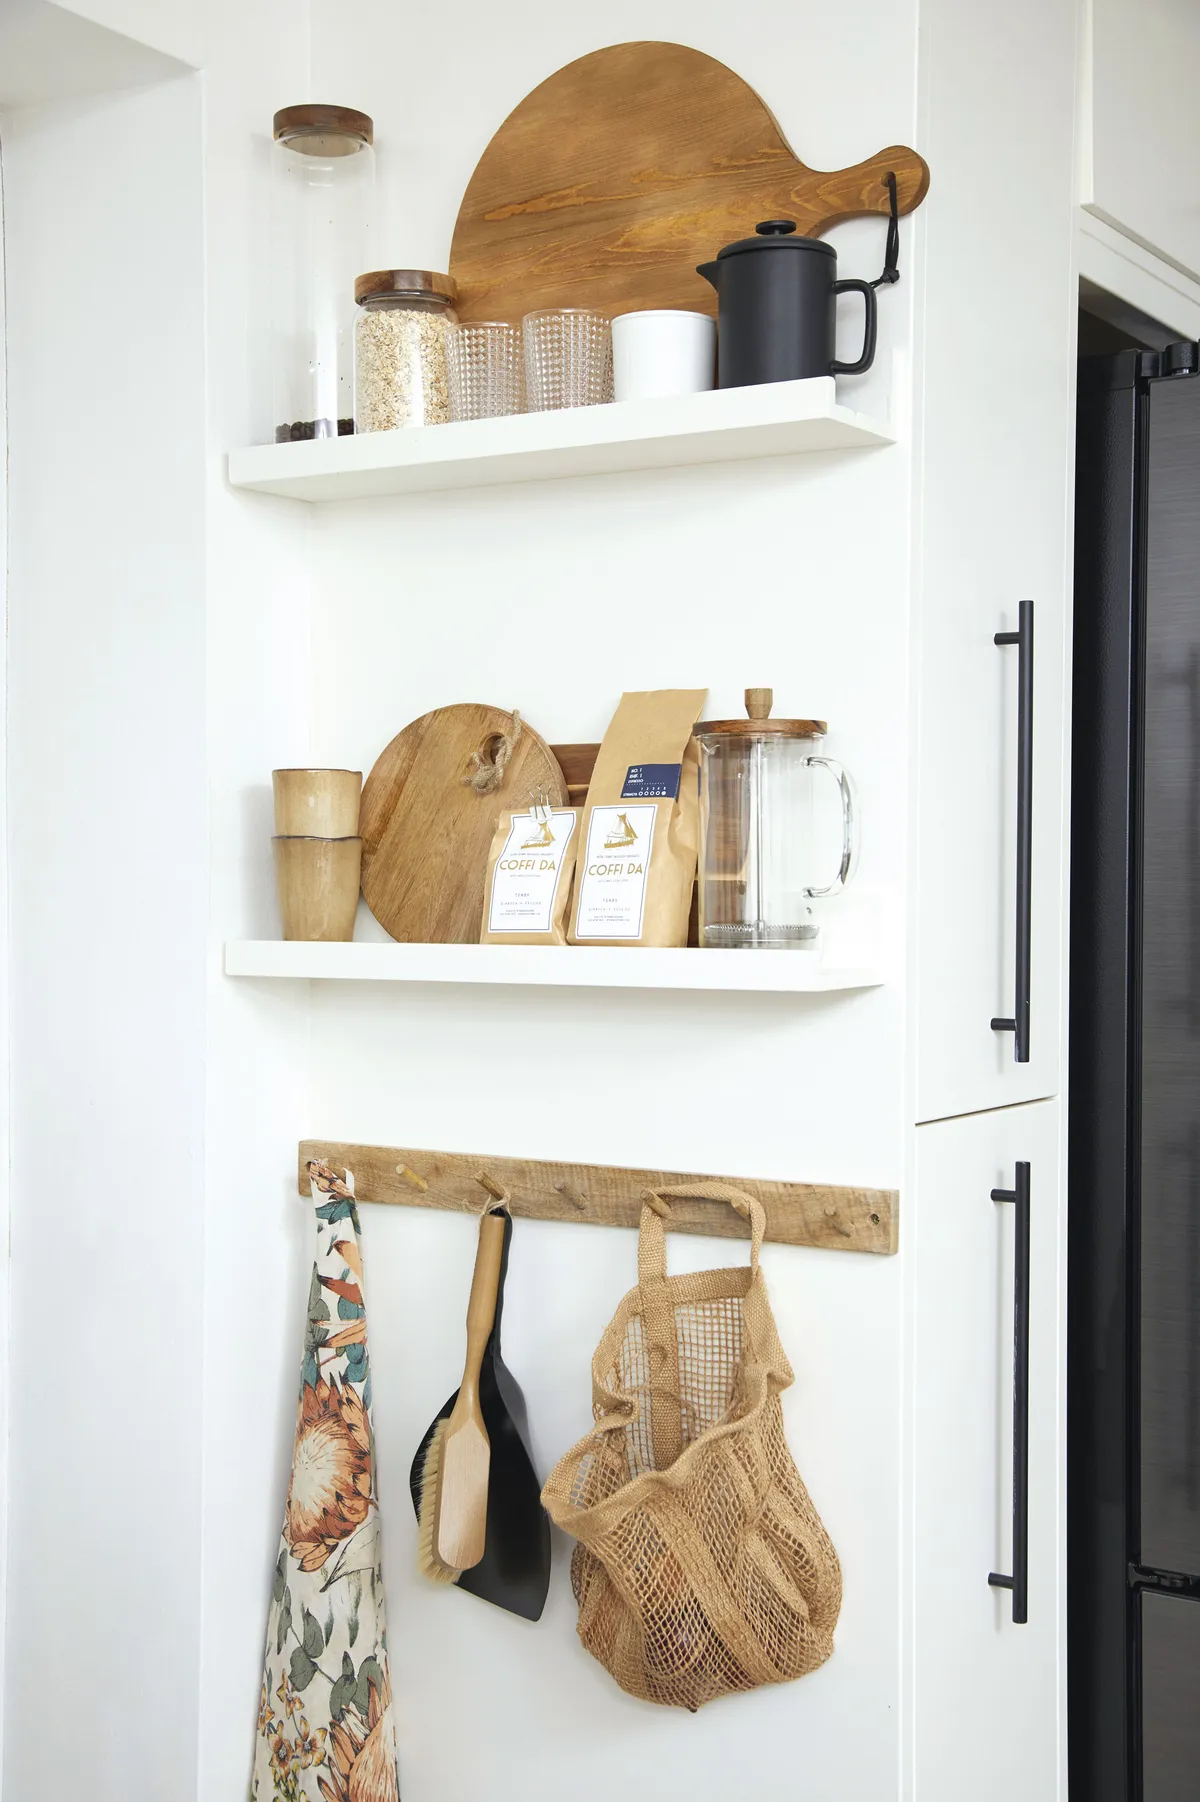 ‘I made this pantry corner out of IKEA picture ledges painted the same colour as the cabinets. I added the wooden hooks, from H&M Home, to create a display and add colour and texture to the space’